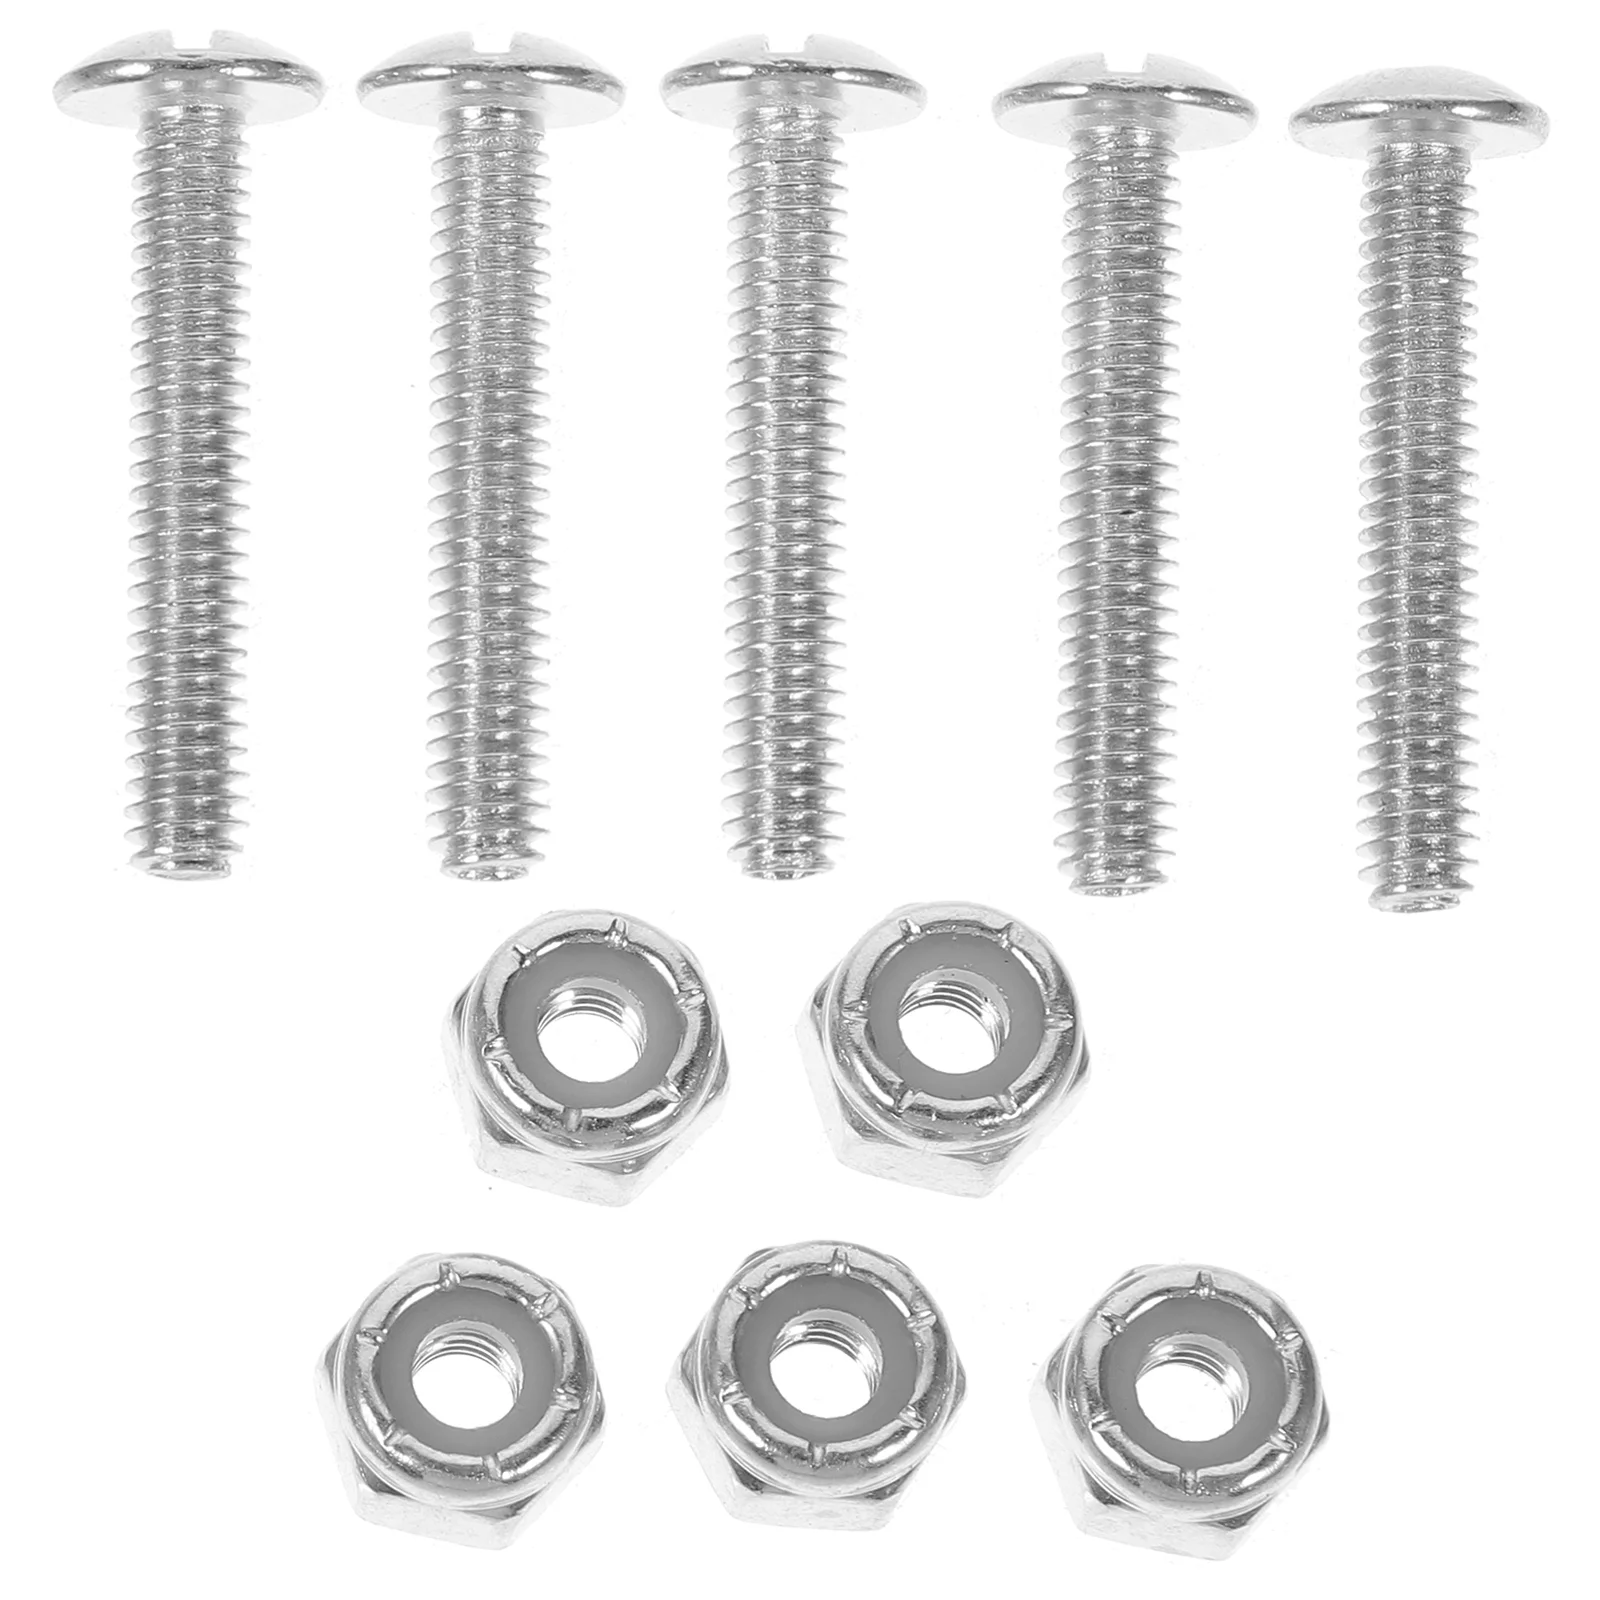 12 Pcs Table Football Screws Foosball Replacement Parts Nut Soccer Hardware Machine Nuts Galvanized Iron Accessories seleadlab voron 2 4 r2 screws full kit diy project fasteners screws nuts 3d printer full kit for voron v2 4 trident parts